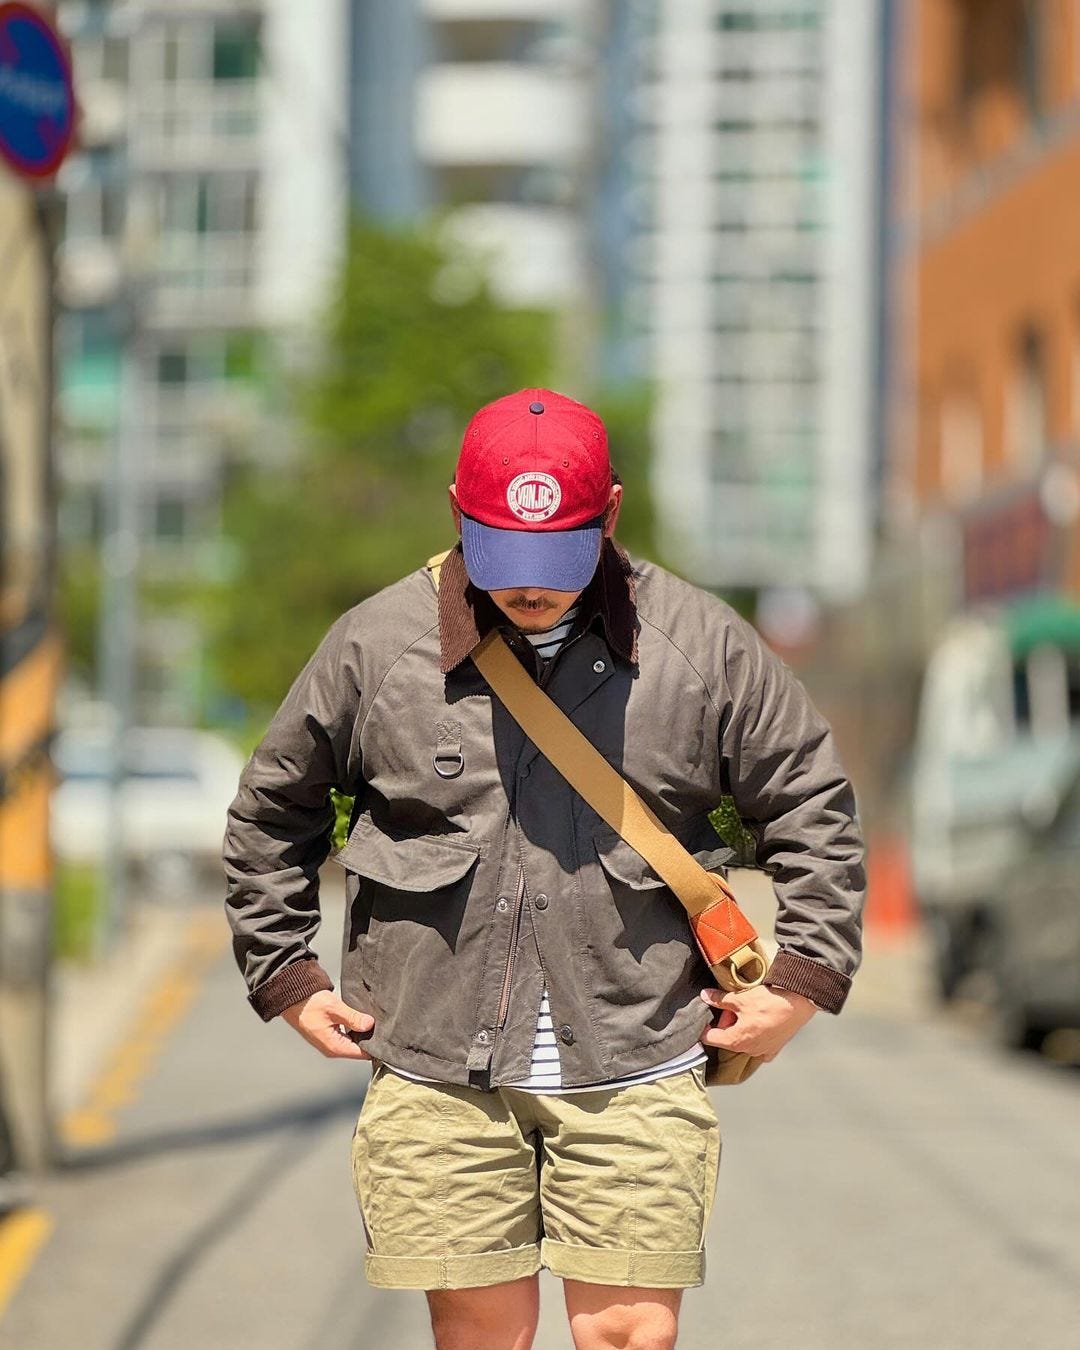 man in red baseball cap with blue bill, olive-colored jacket, brown bag across his body, chino shorts, tall white socks, and red sneakers